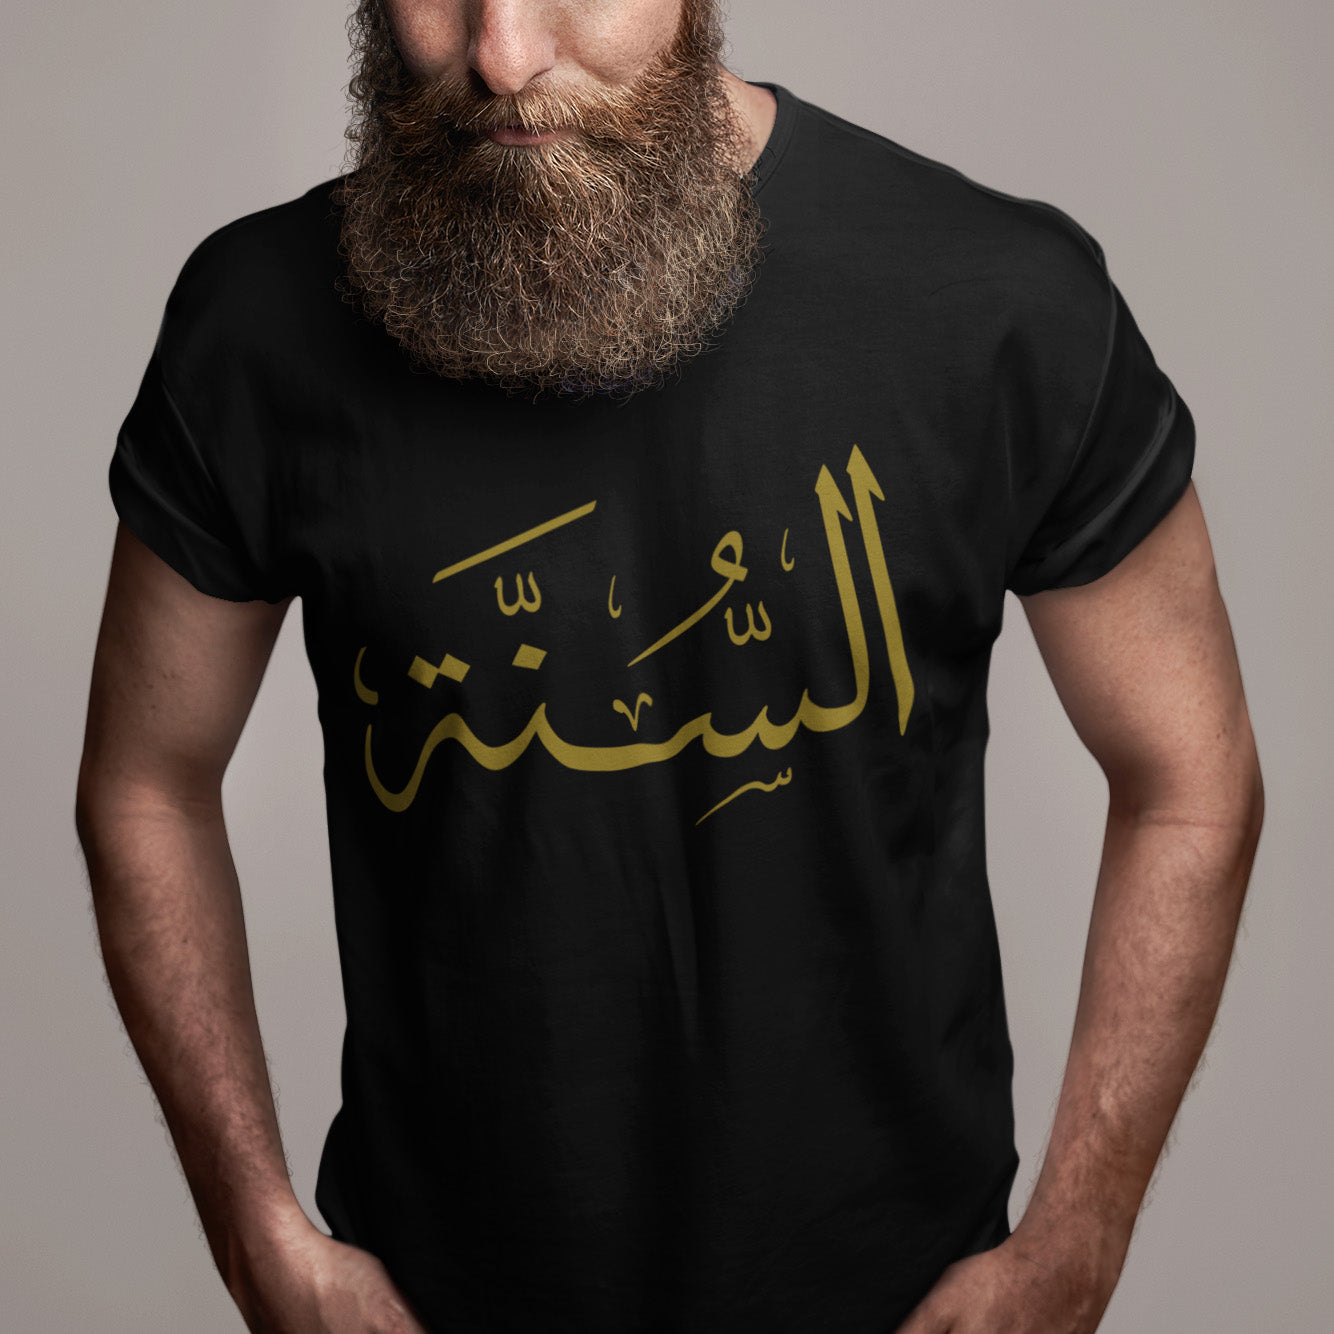 As-Sunna - Or - T-shirt Calligraphie Arabe